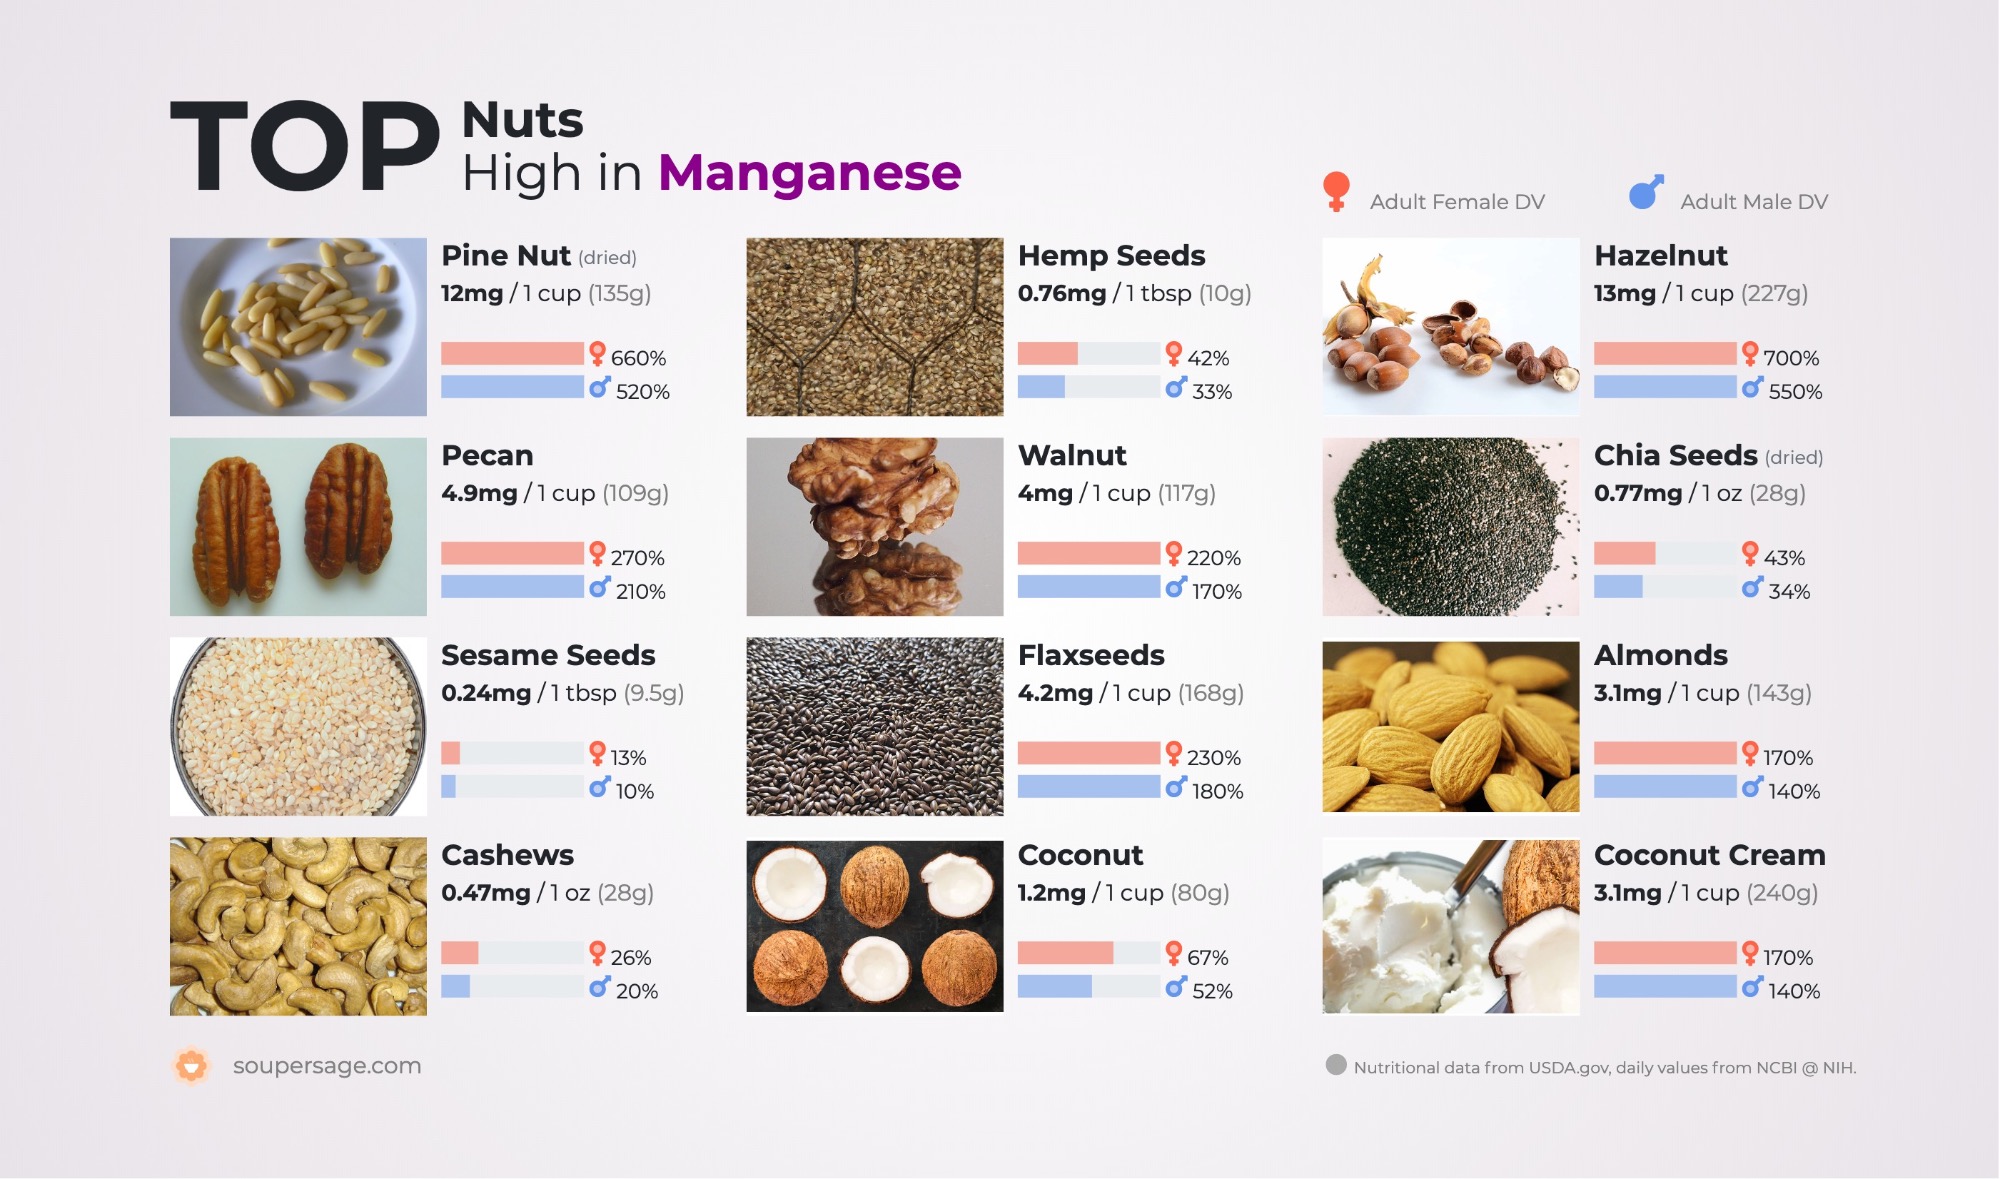 image of Top Nuts High in Manganese